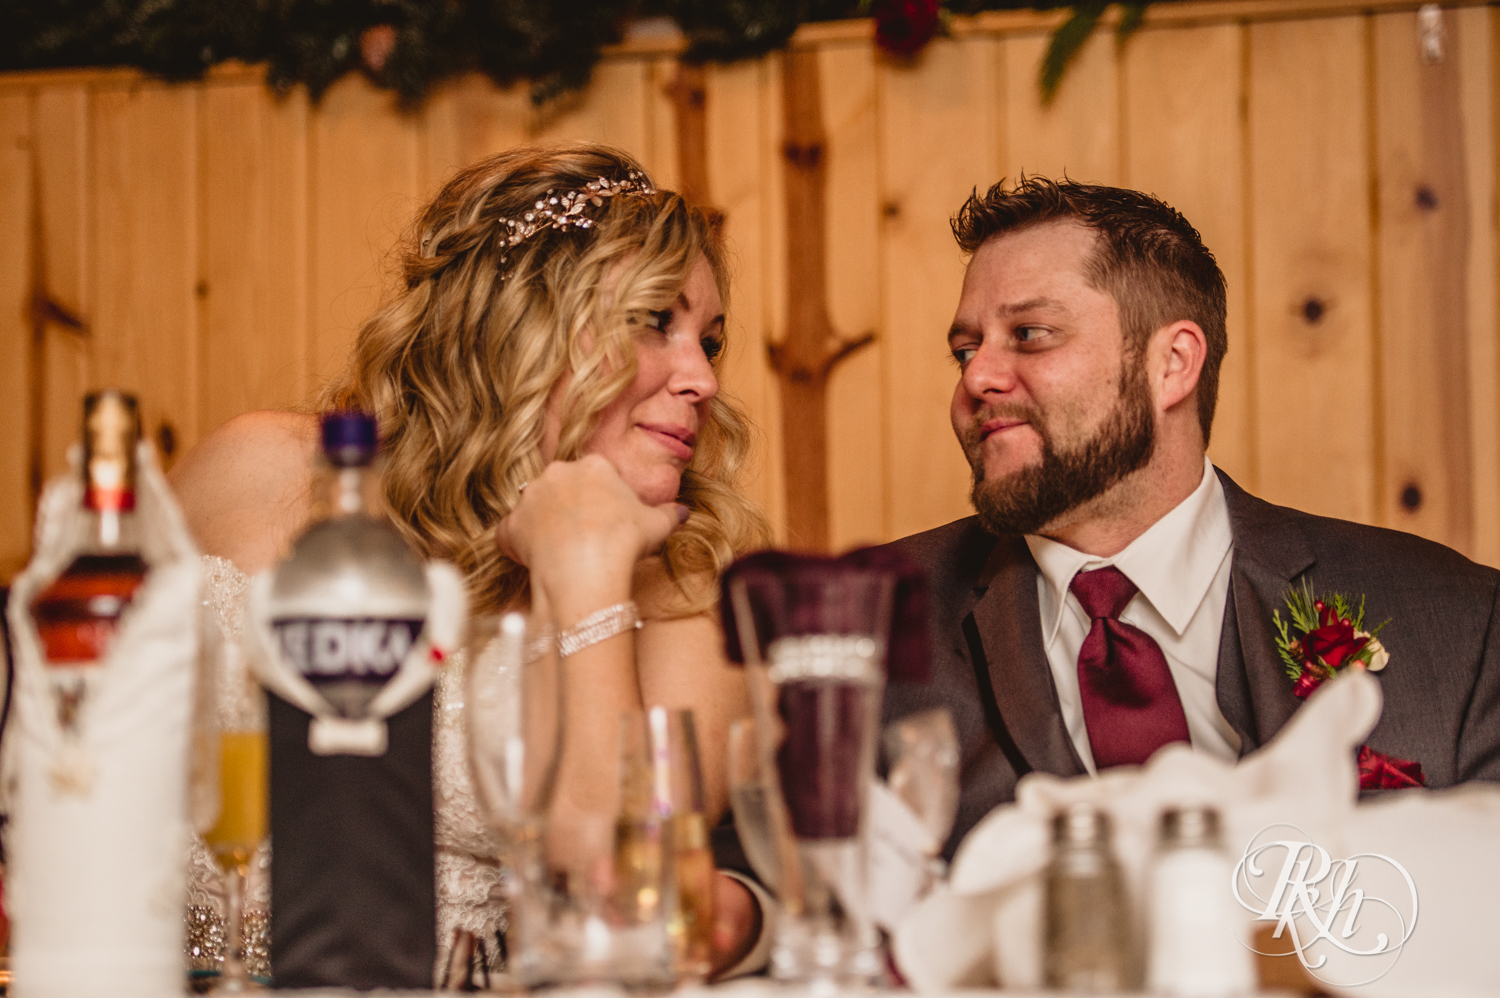 Bride and groom smile during winter wedding reception at Whitefish Lodge in Crosslake, Minnesota.